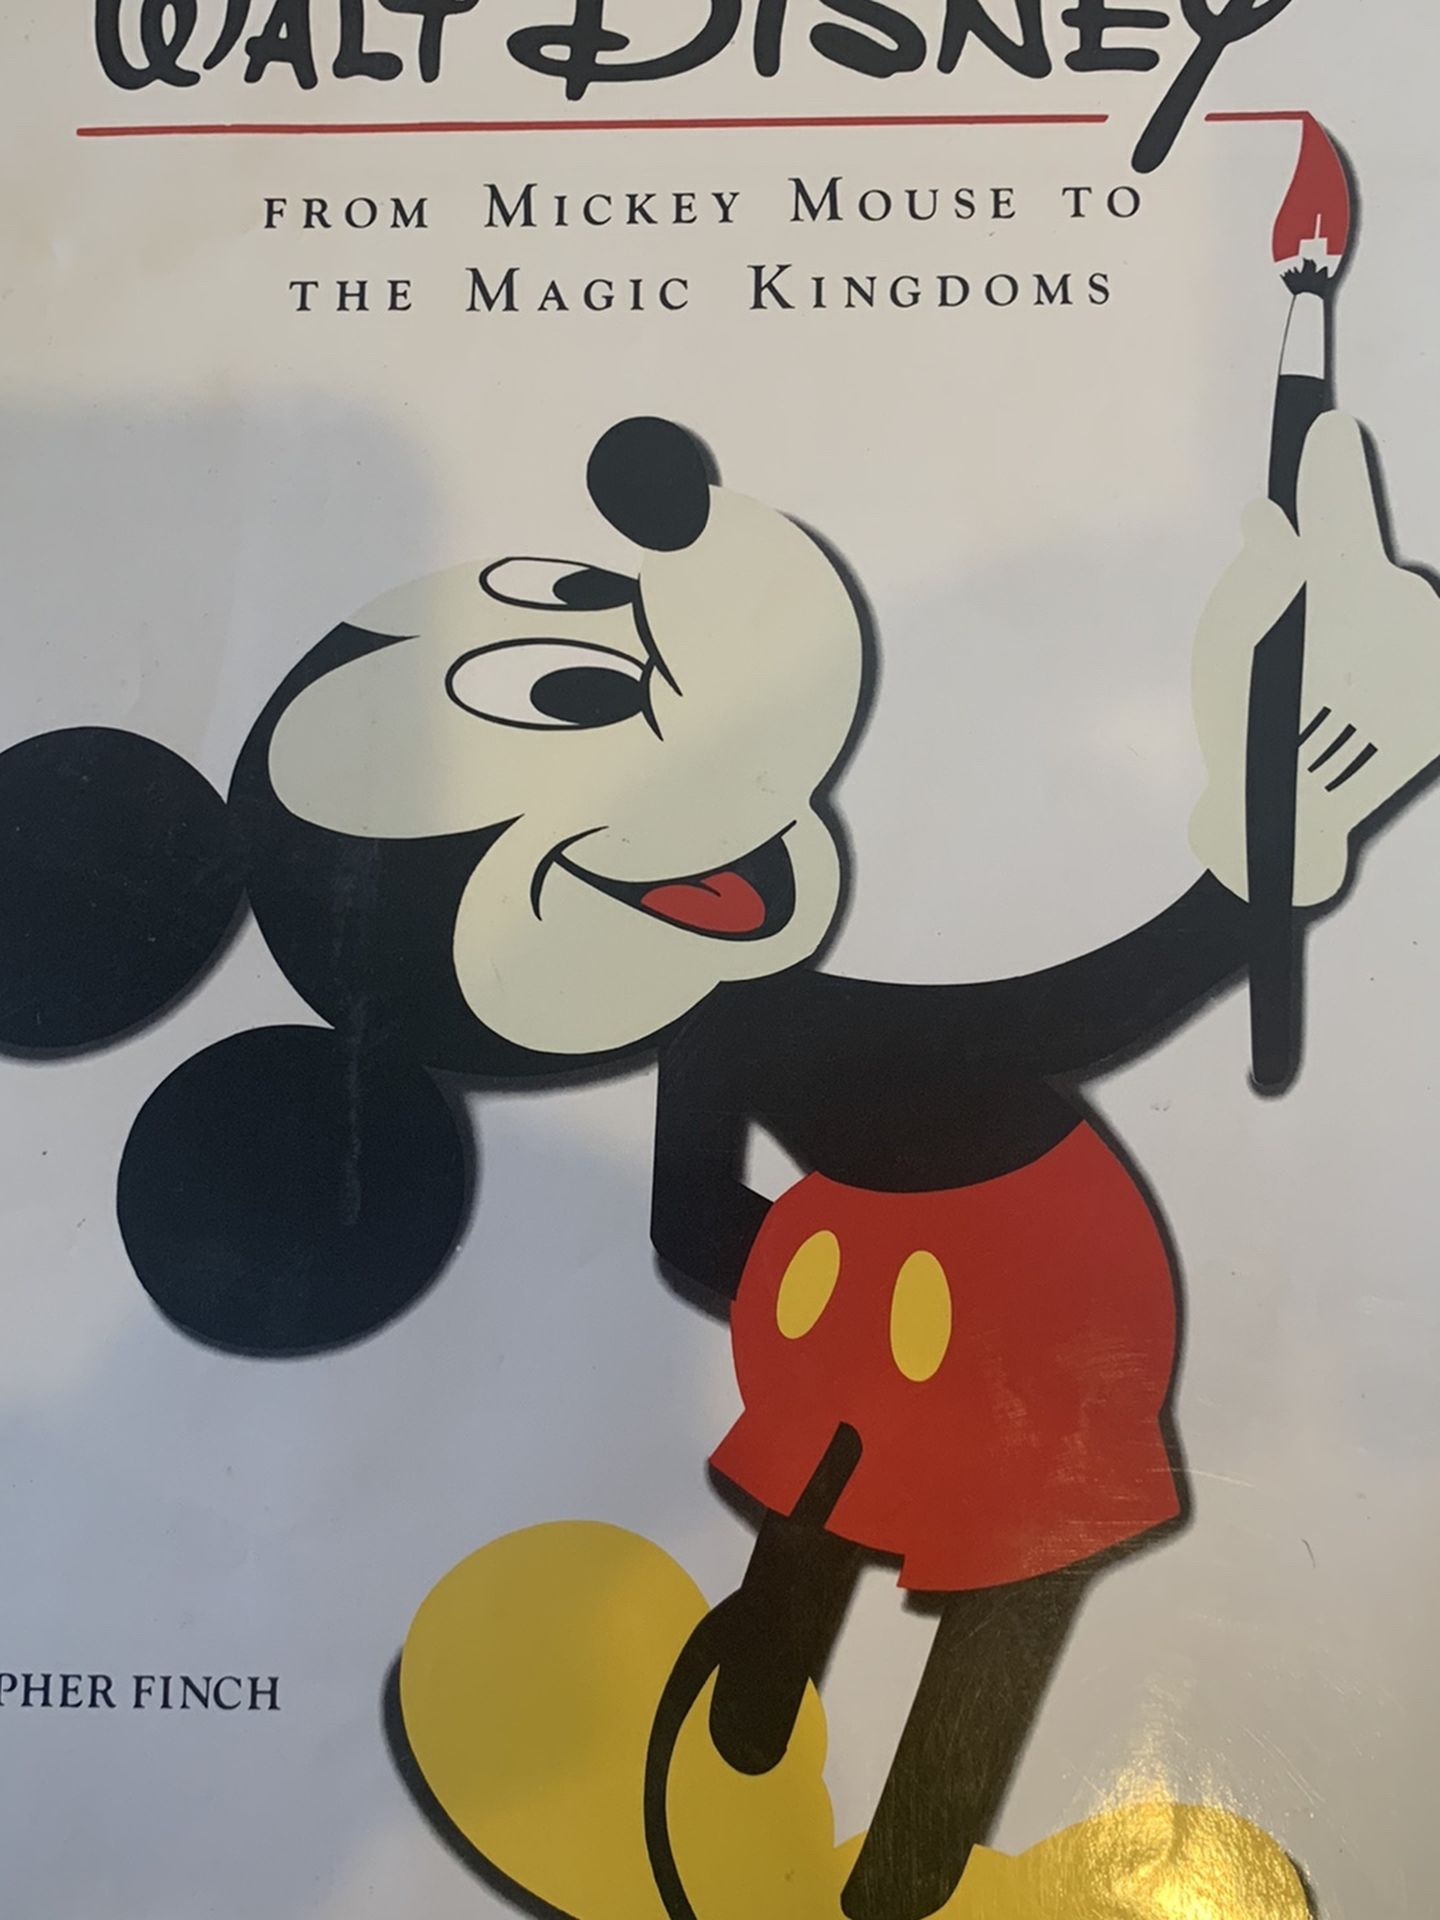 The art of Walt Disney From Mickey Mouse To The Magic Kingdom